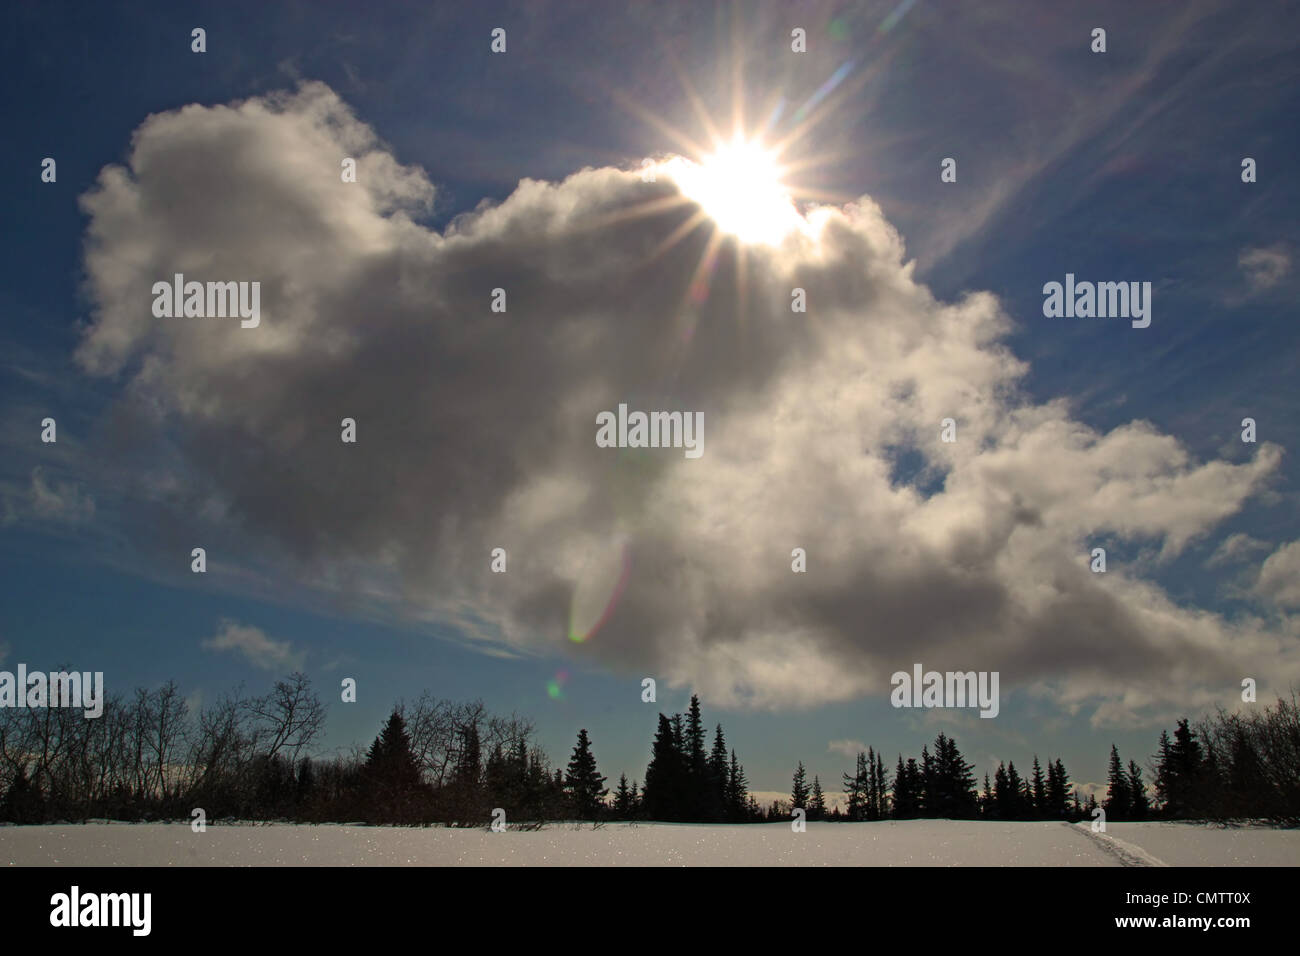 Sun peaking out of dramatic clouds with blue sky, snow and spruce trees. Stock Photo